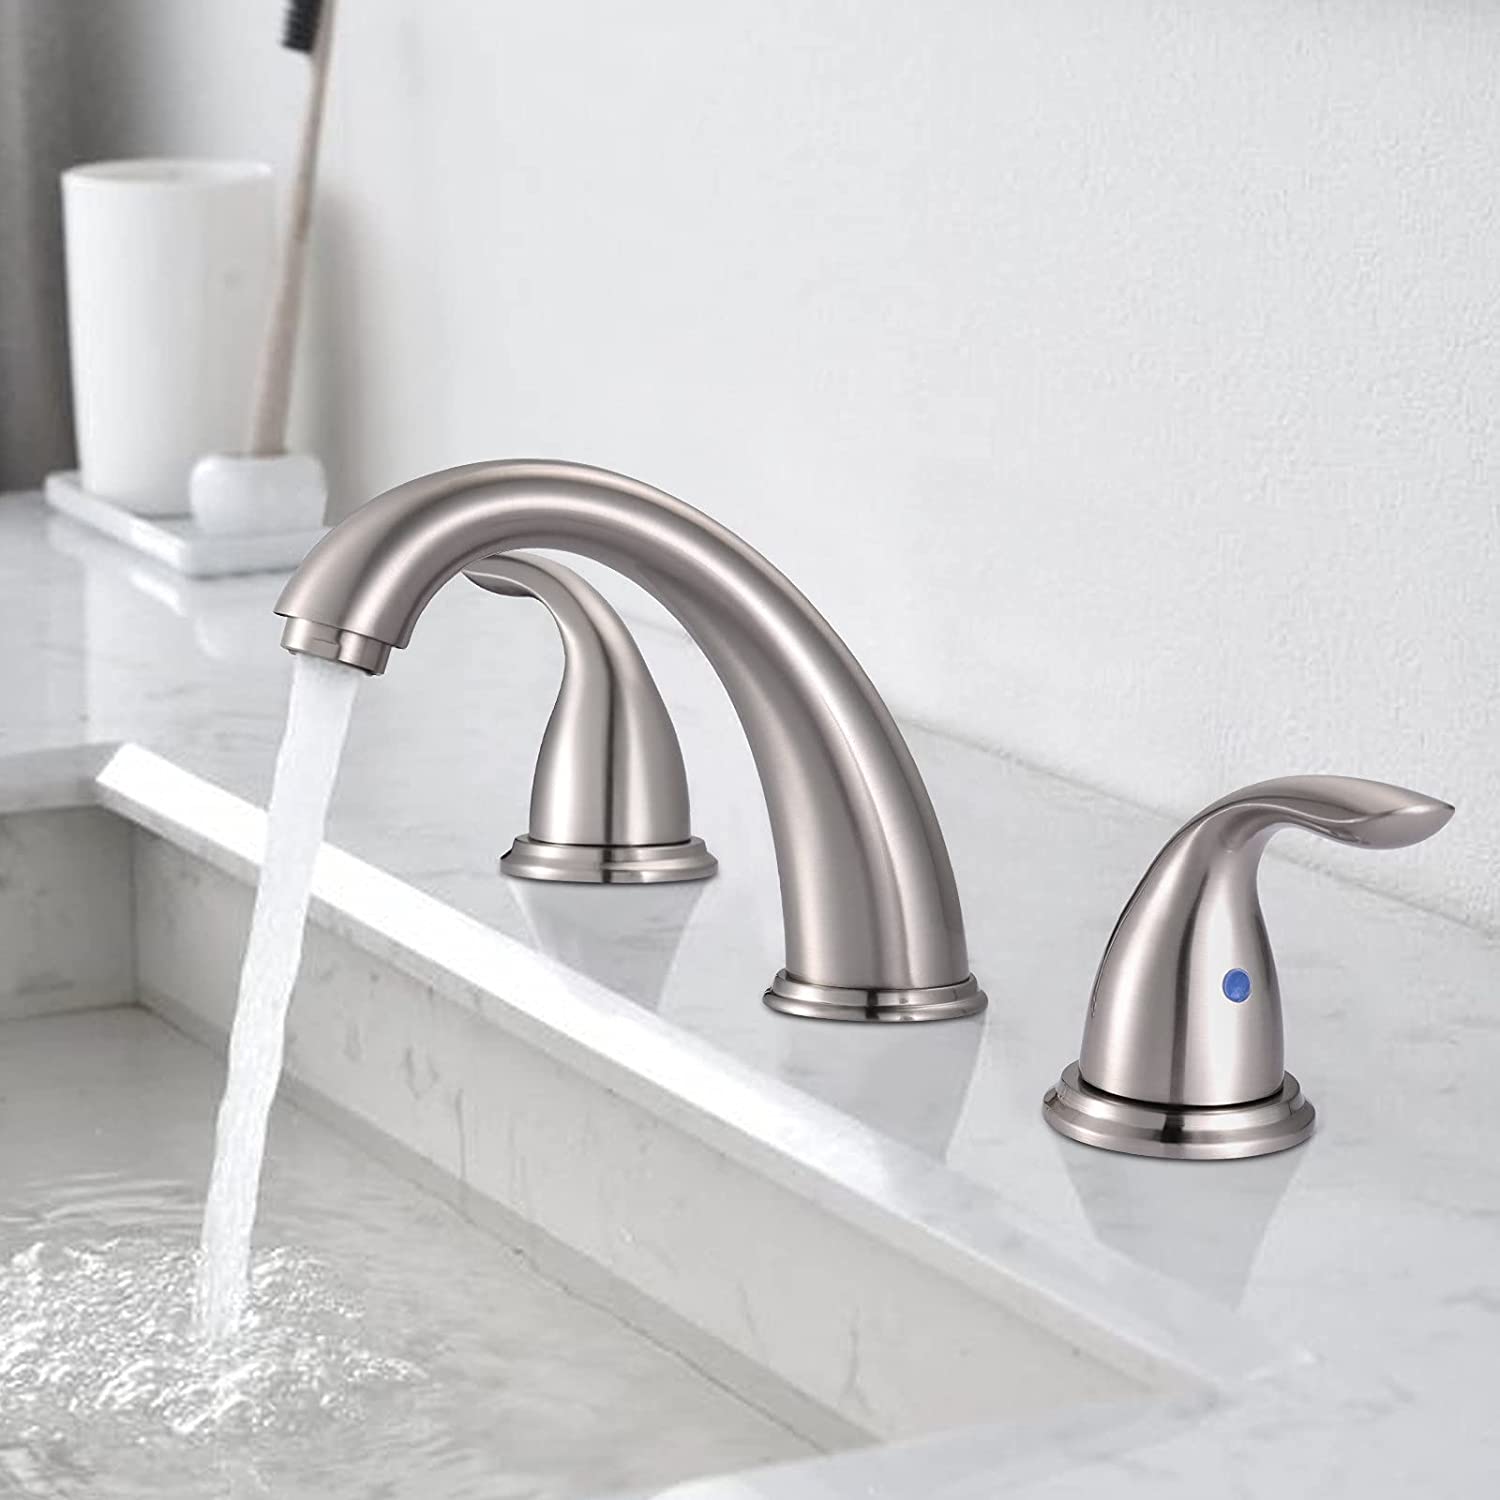 Widespread Bathroom Faucet Brushed Nickel 3 Hole Install,Double Handles Bathroom Faucet with Pop Up Drain and Hot & Cold Water Supply Hoses